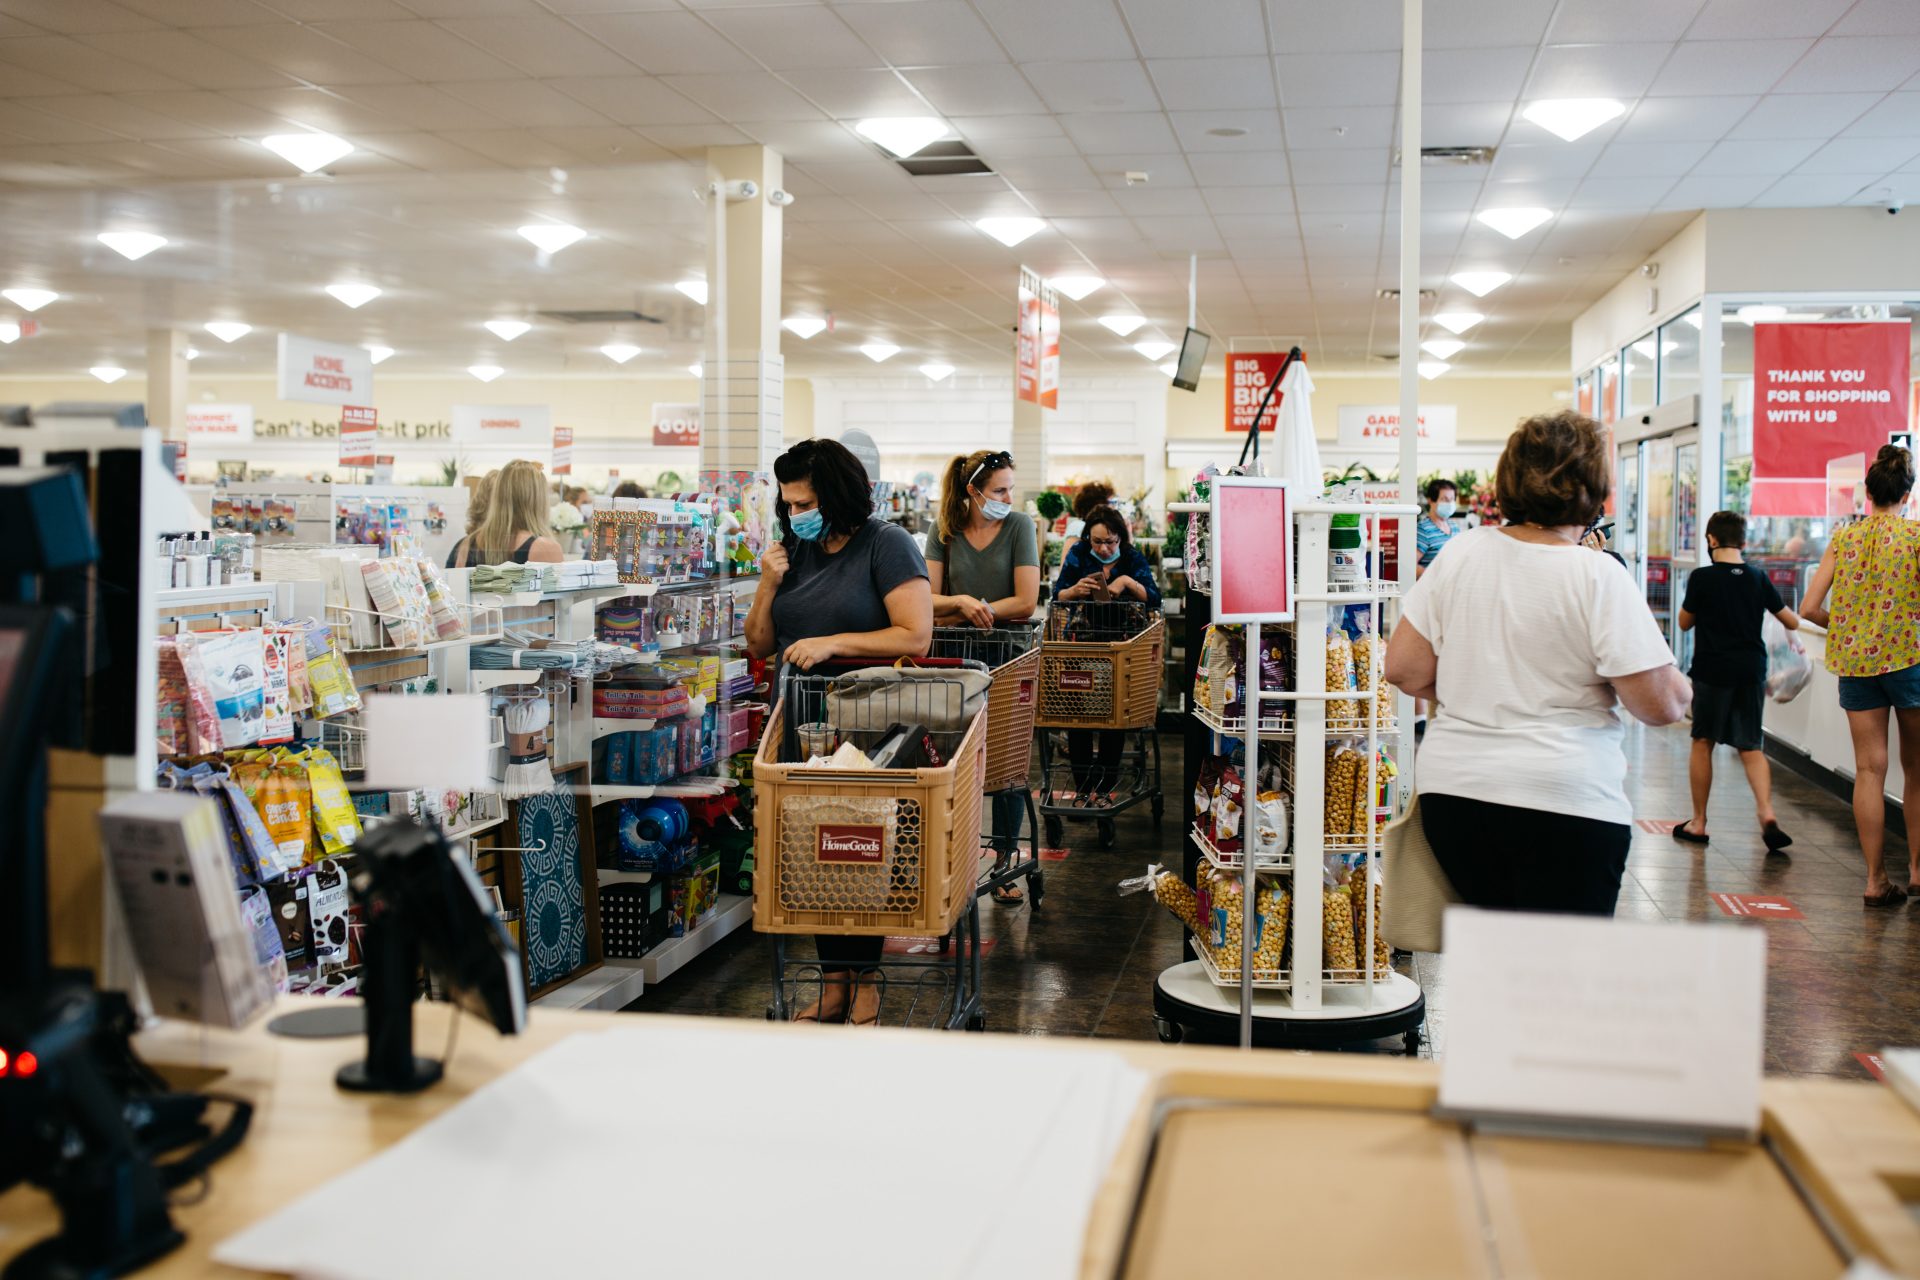 Shoppers browse at Home Goods along Jonestown Road in Harrisburg on Friday, June 19, 2020.